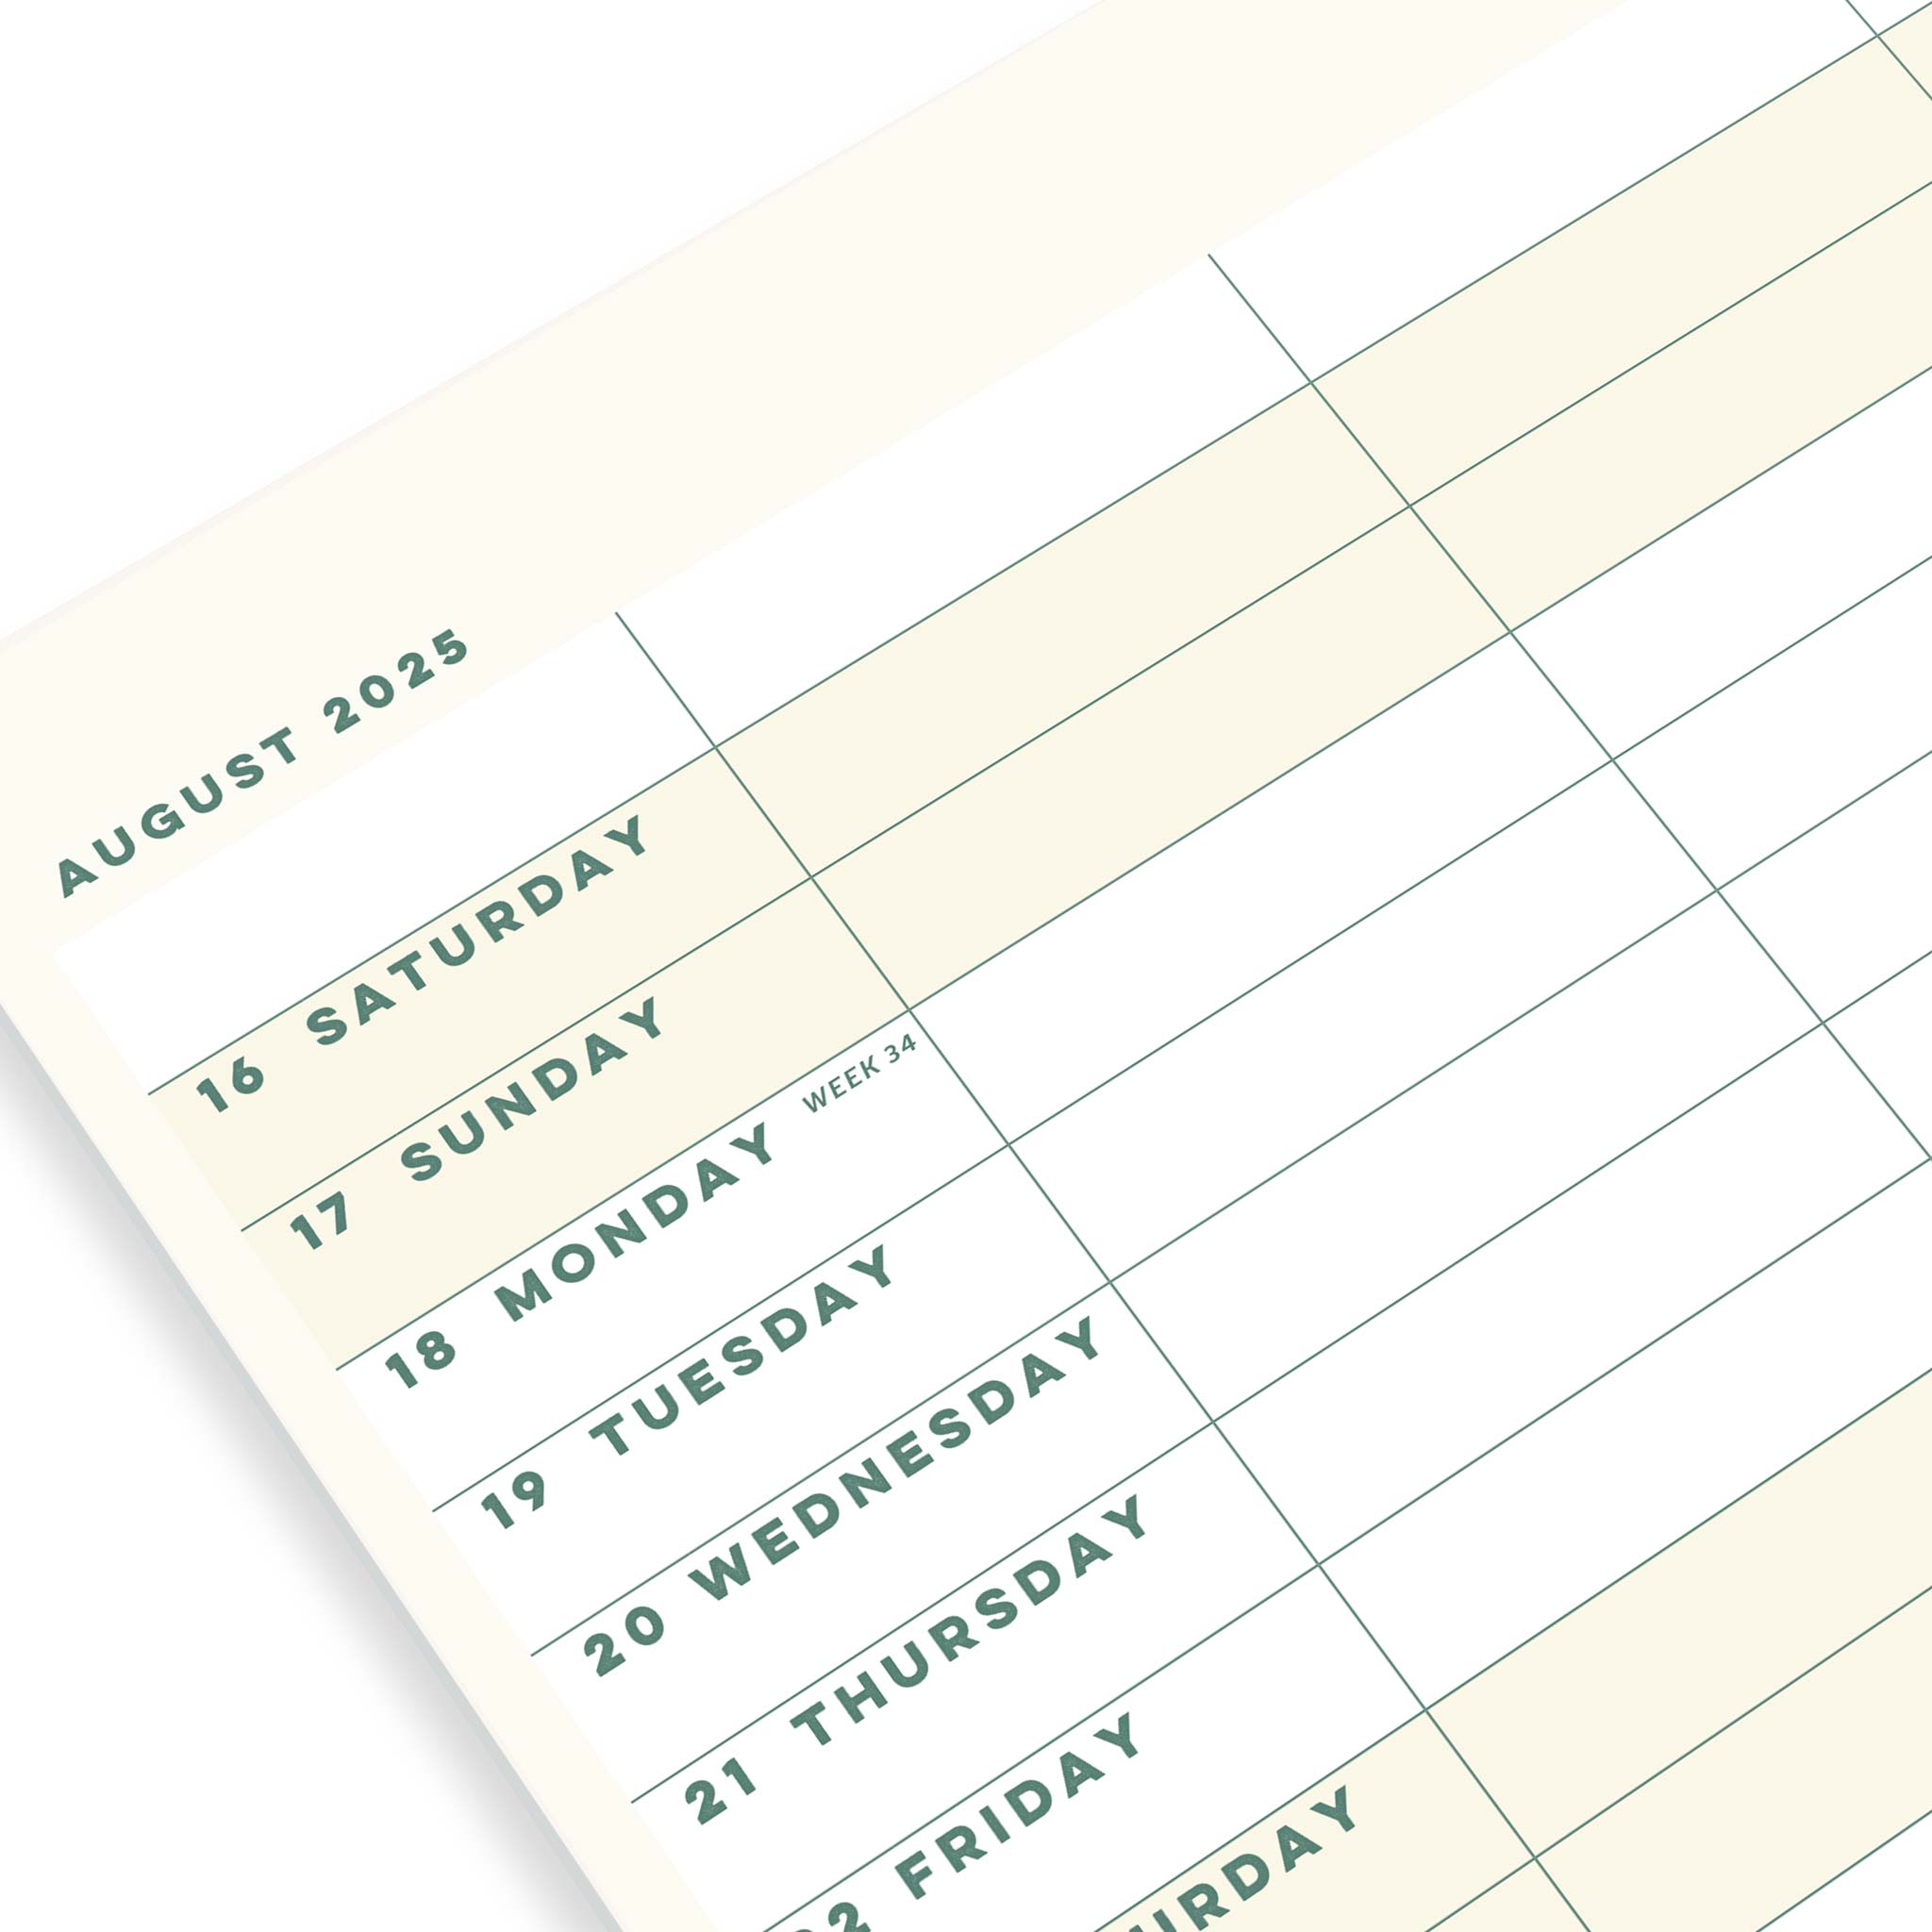 A calendar page for August 2025 with a columned layout and shaded weekends